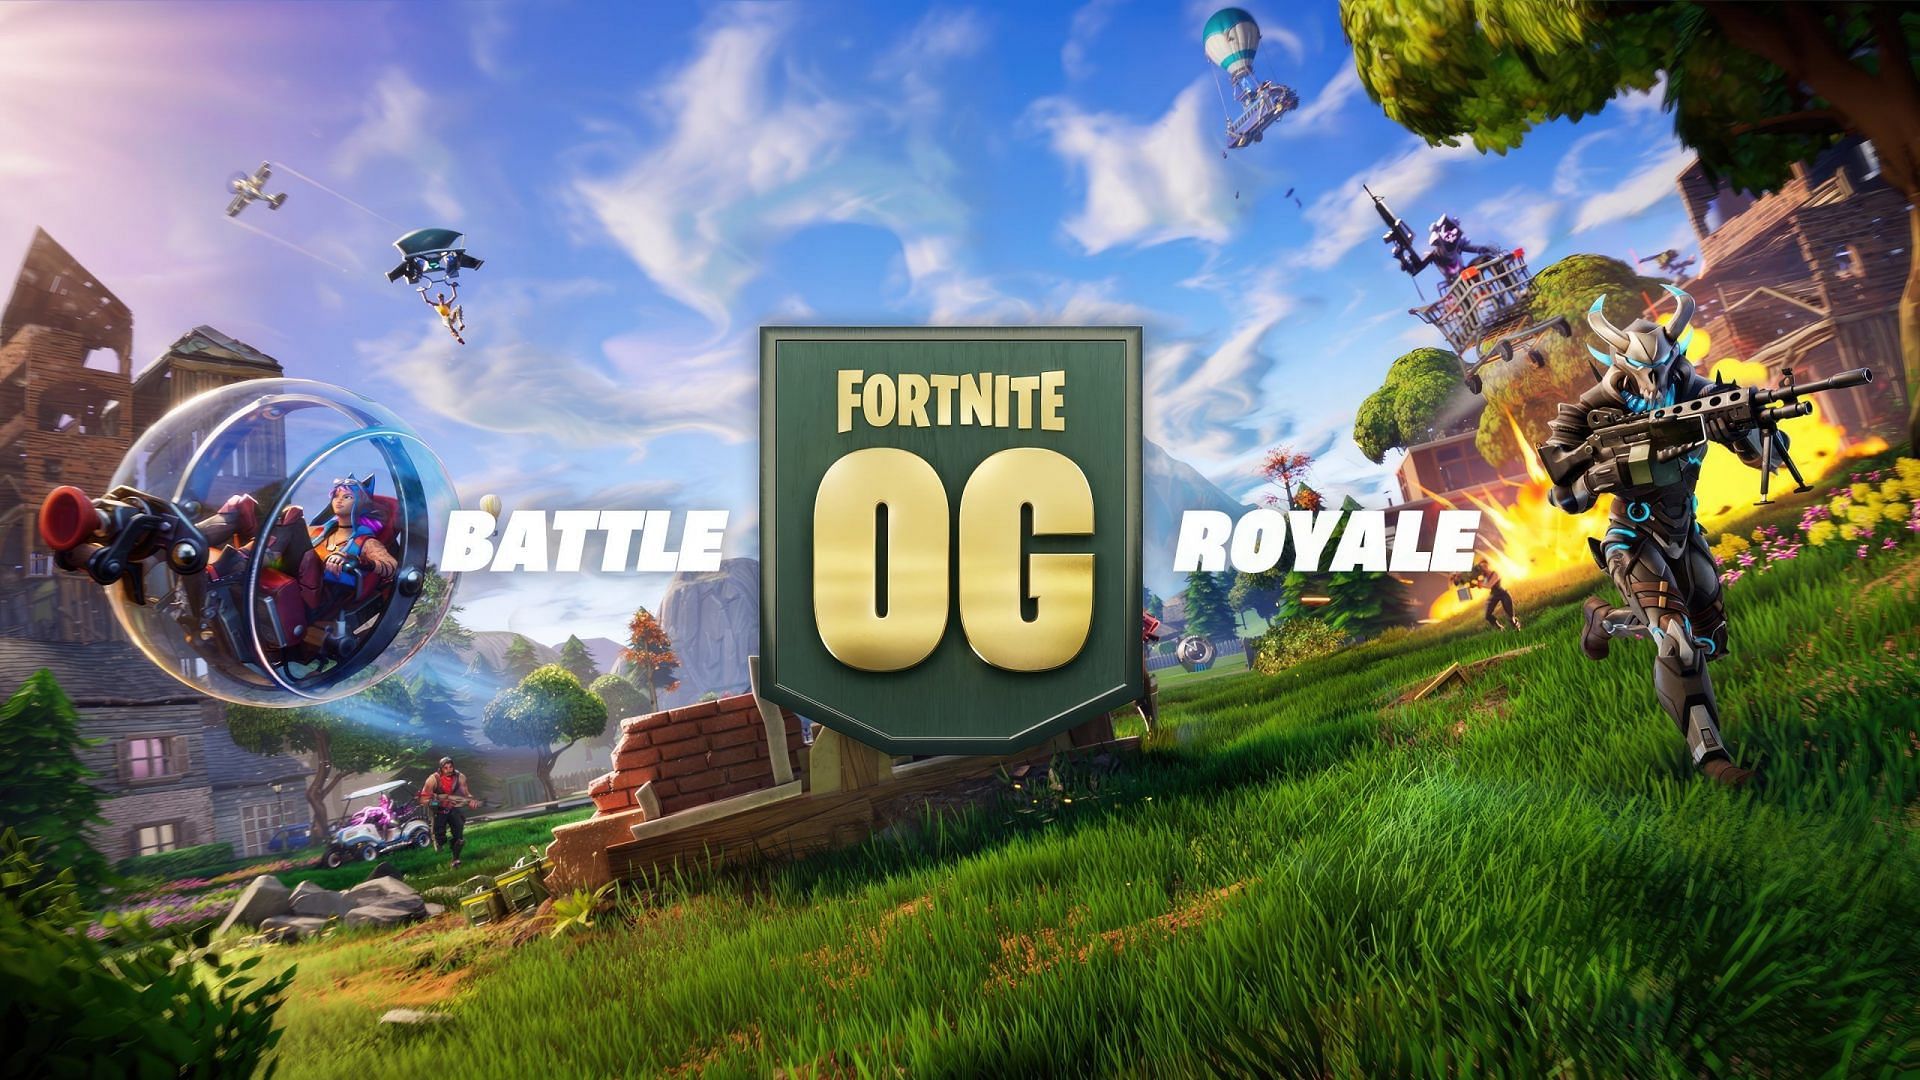 5 reasons why the Fortnite community missed the OG days